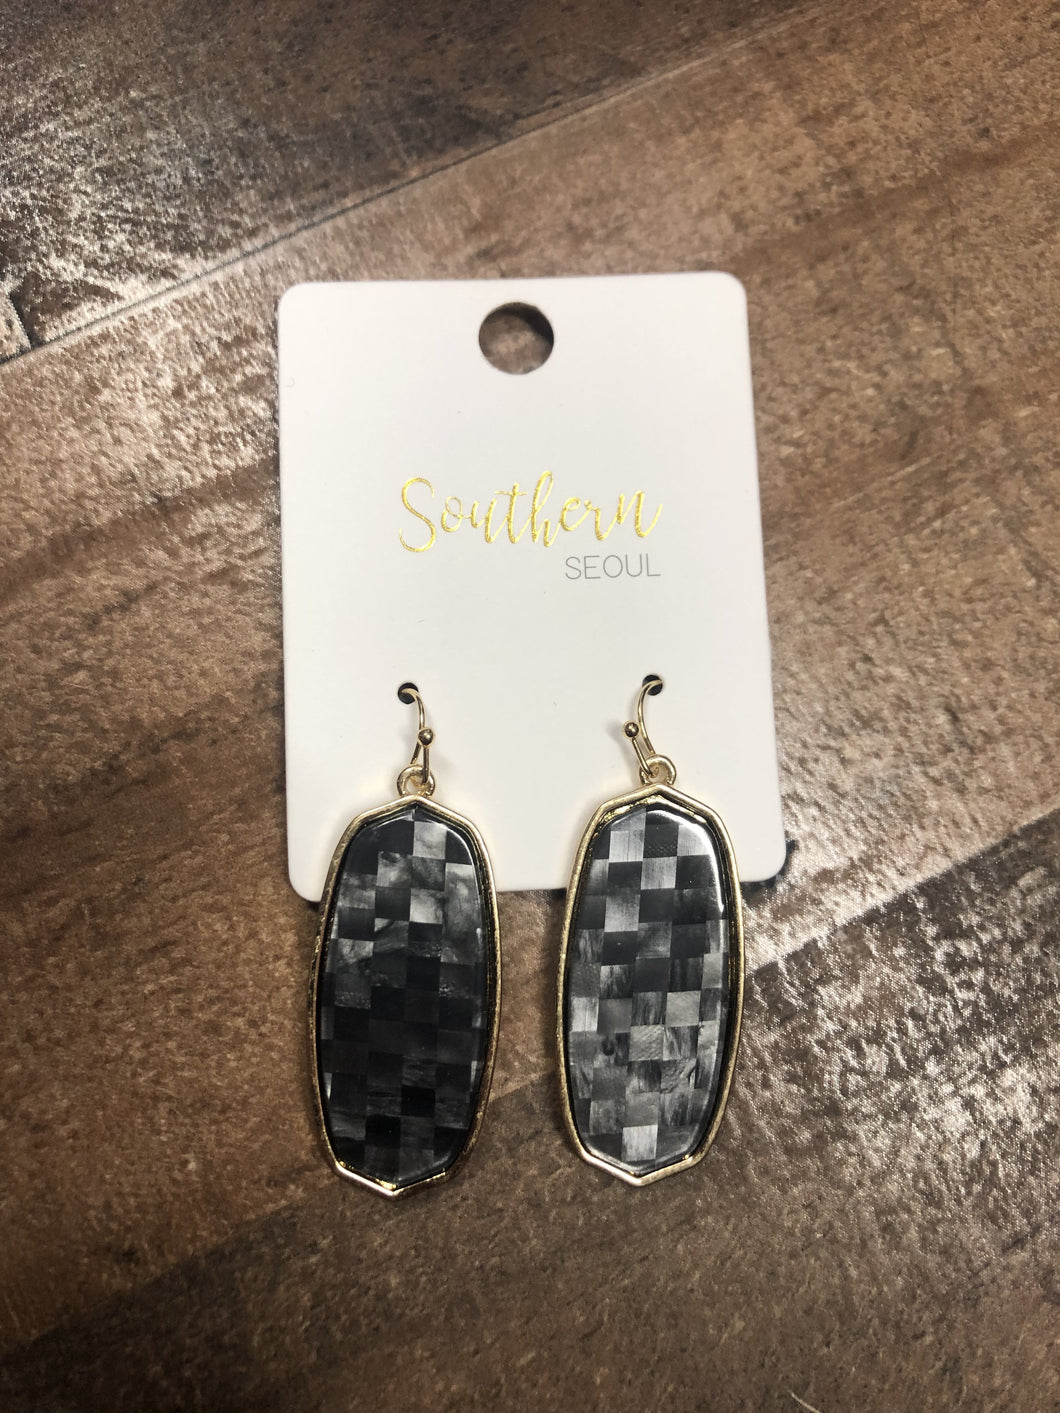 Our Peyton Hexagon Dangle Earring comes in Grey and White!